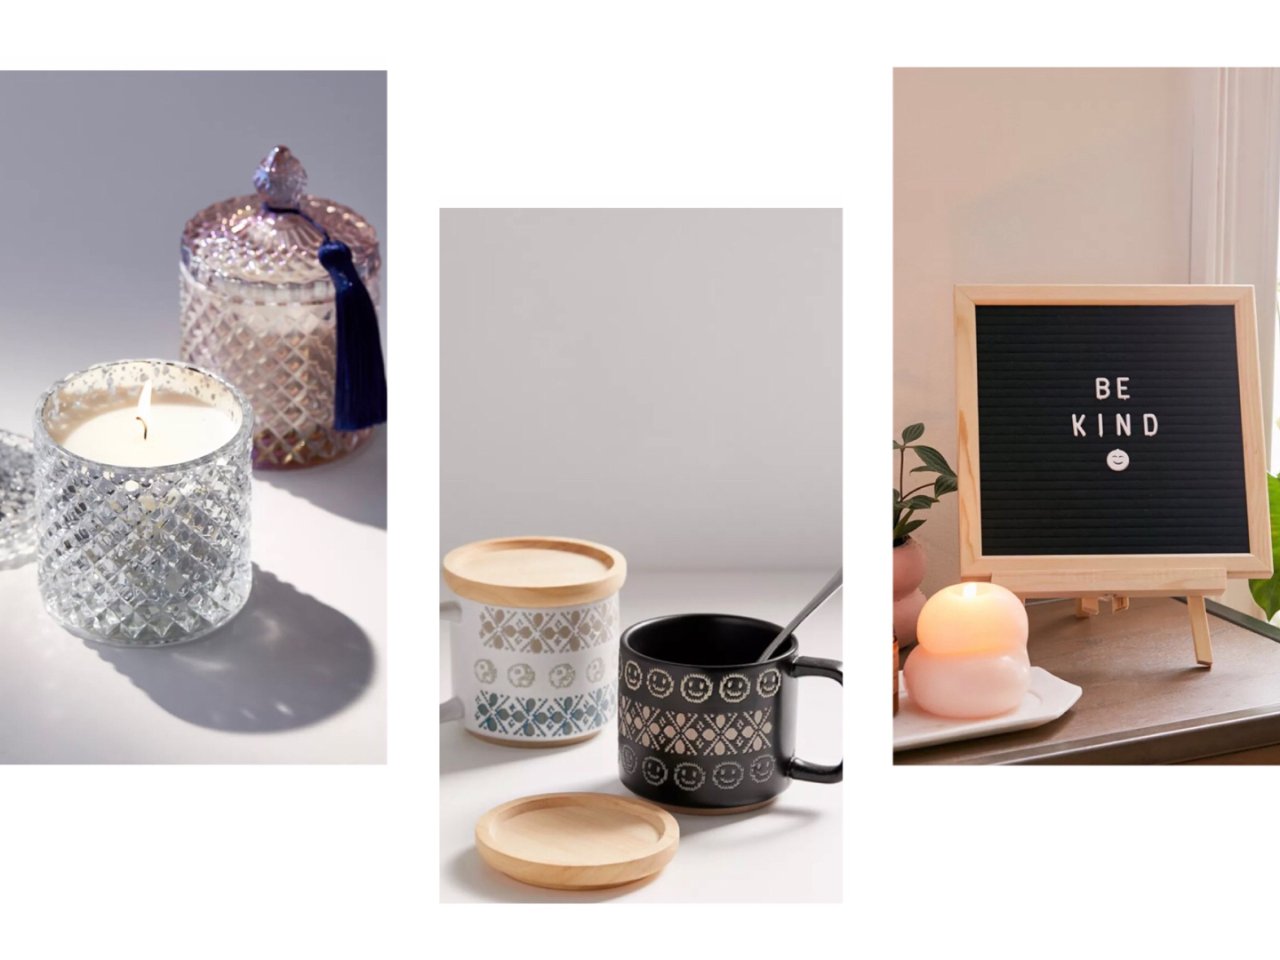 Chloe Glass Holiday Candle | Urban Outfitters,字母黑板,杯子